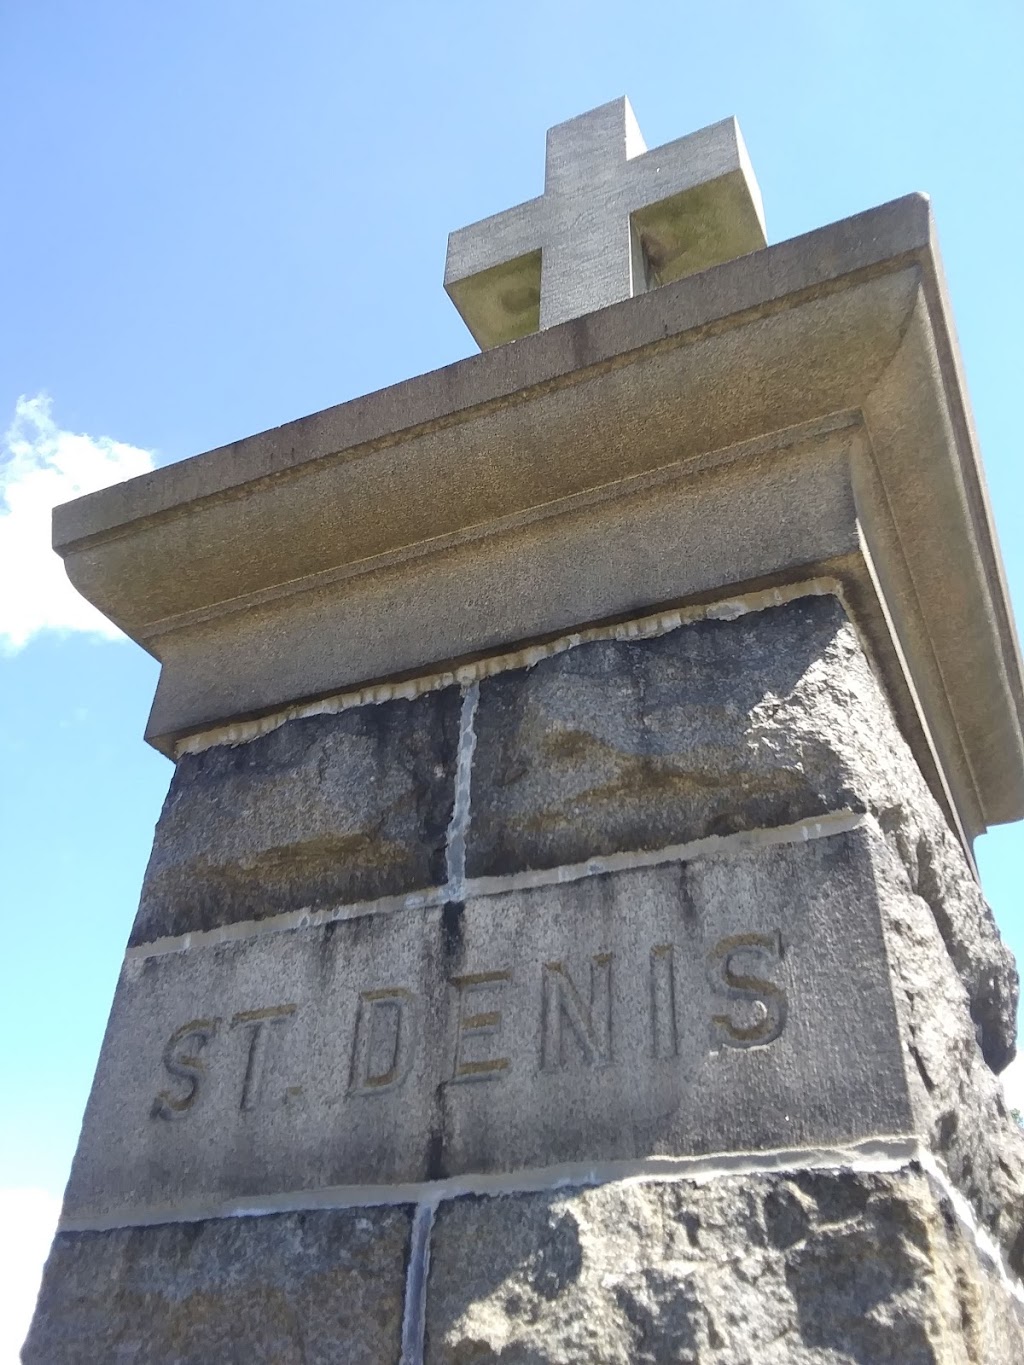 St Denis Cemetery | E Eagle Rd, Havertown, PA 19083 | Phone: (610) 446-1217